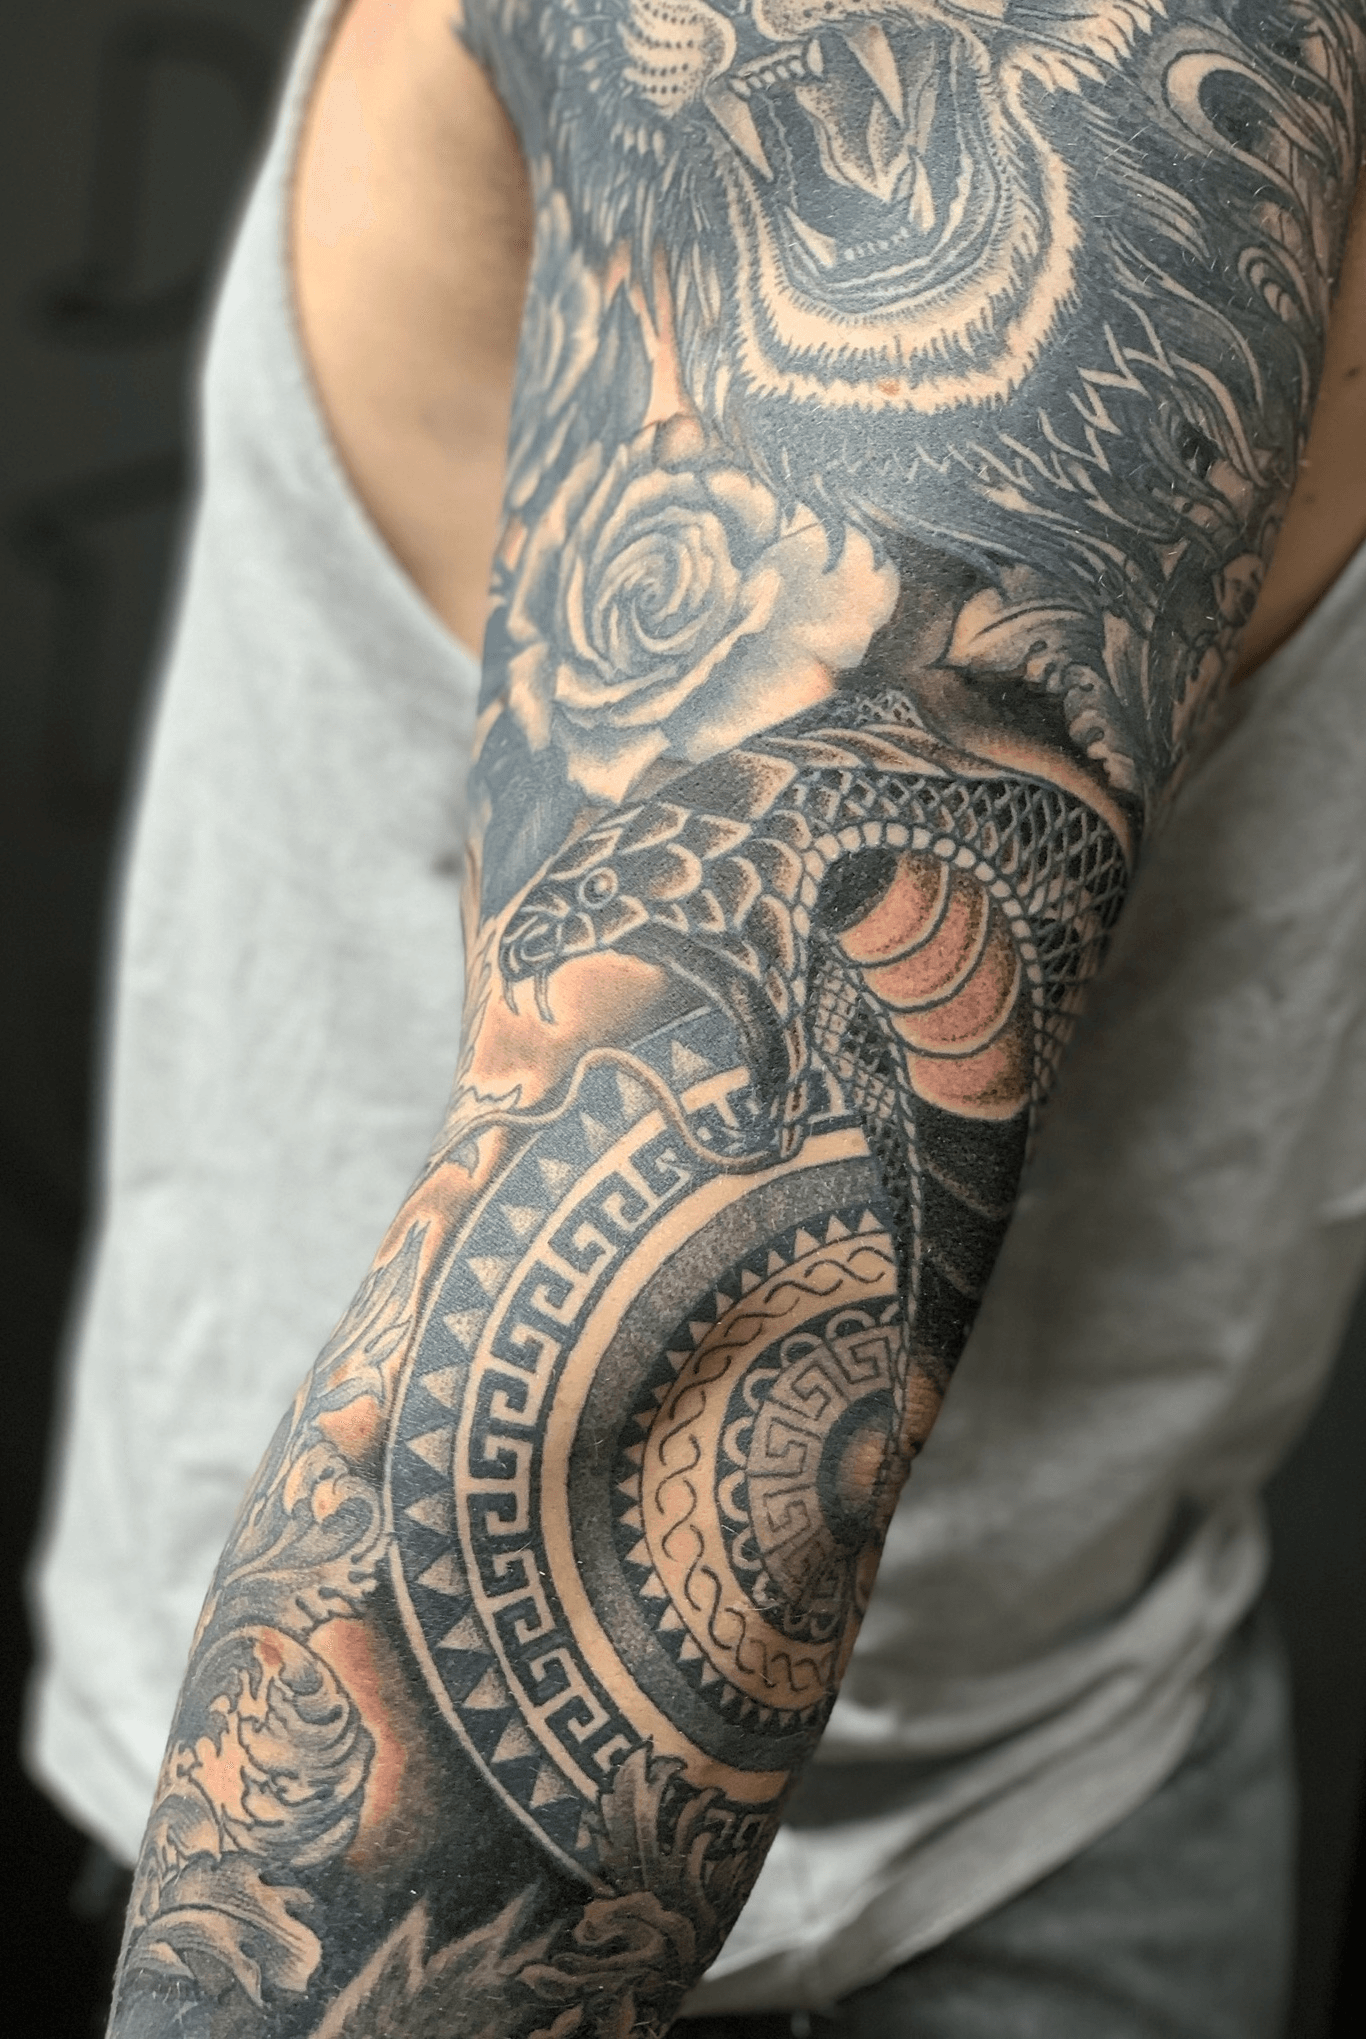 Awesome Tattoos  Gallery